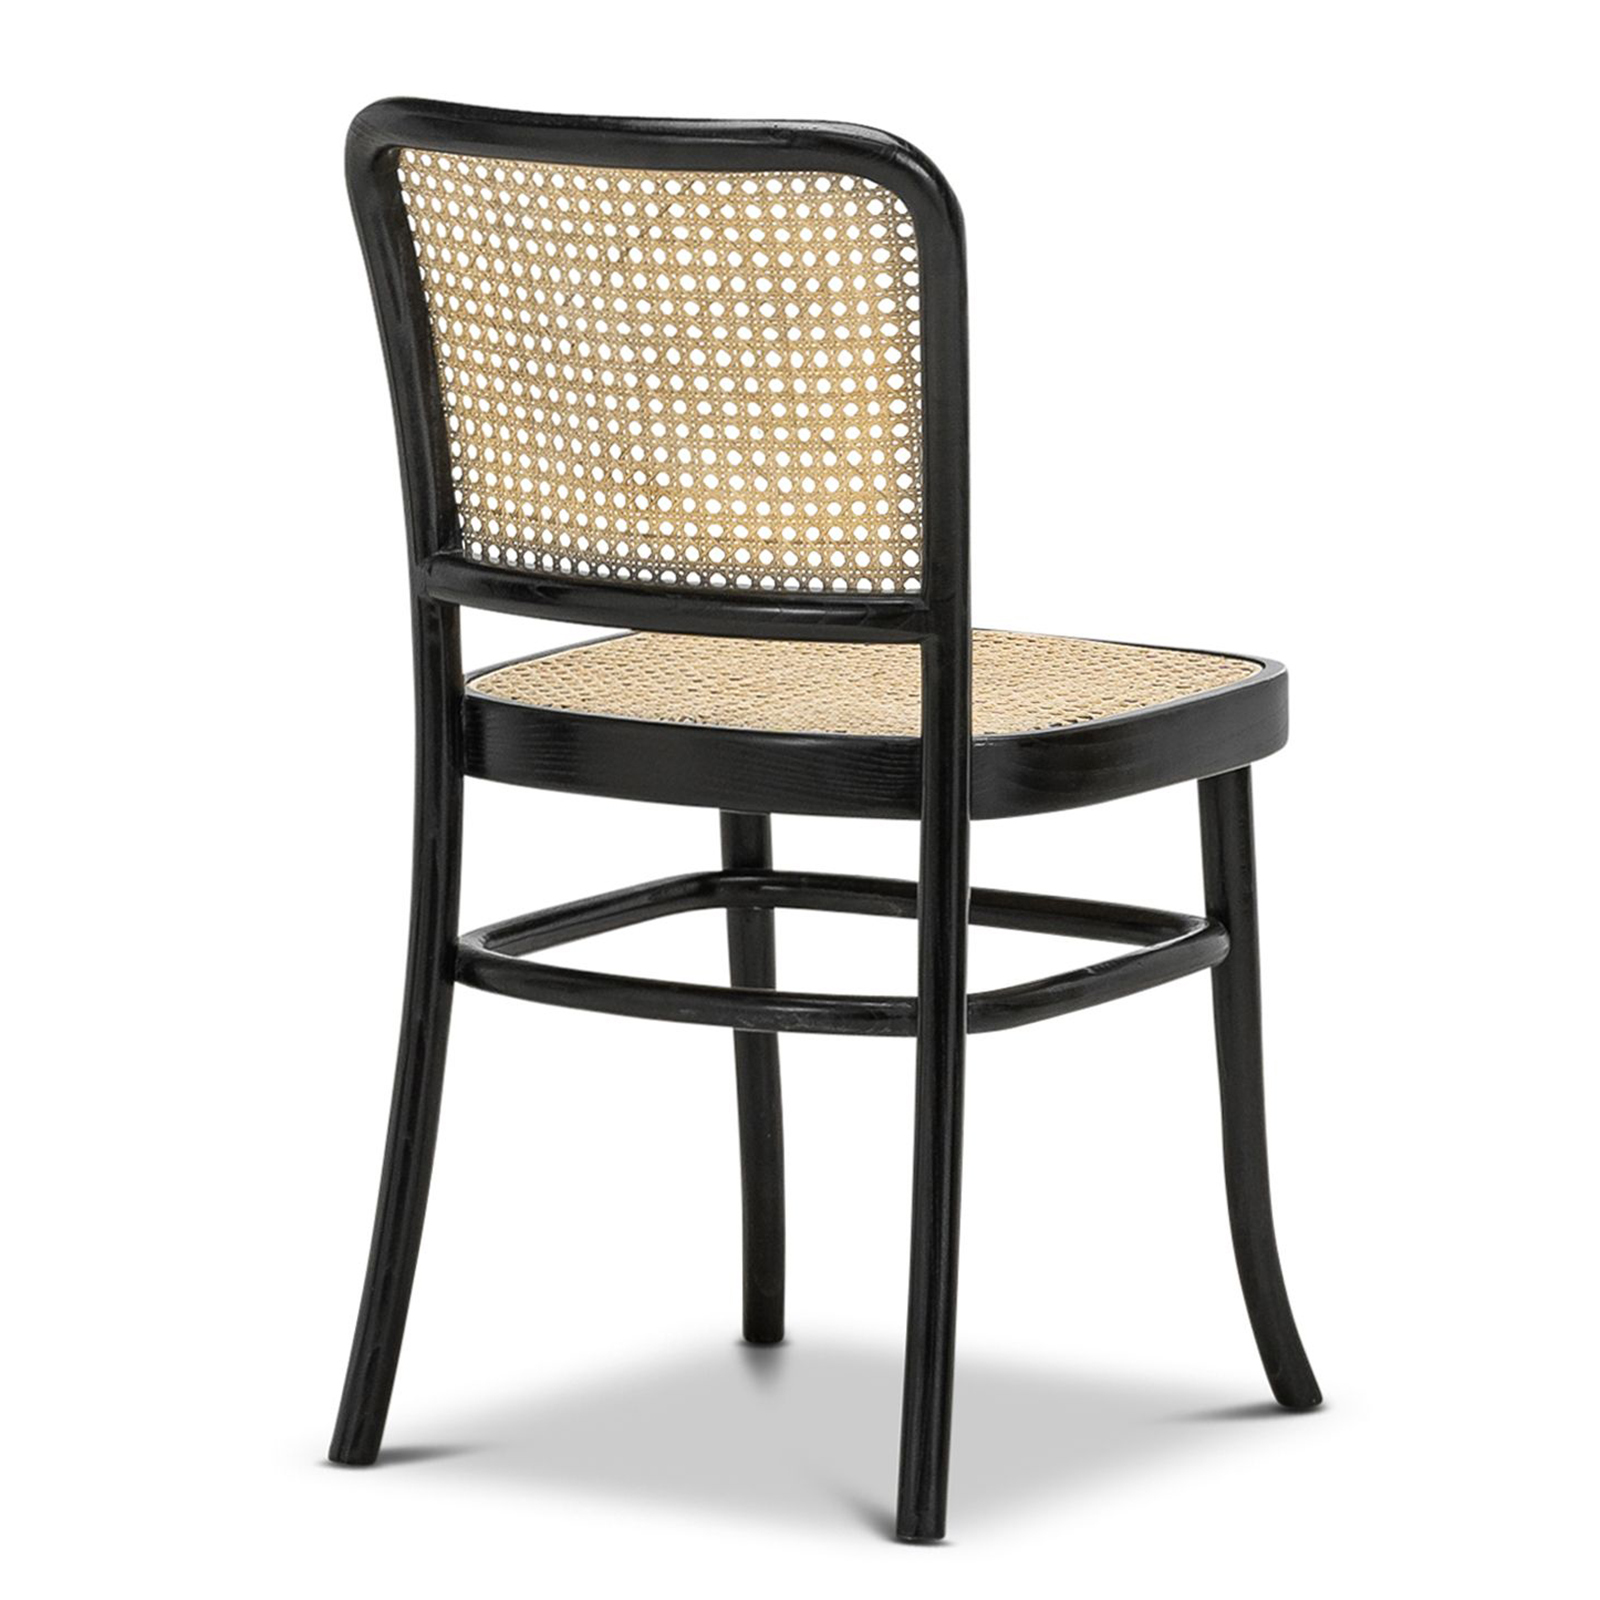 Woven Dining Chairs Black / Woven Leather Dining Chair | Architonic